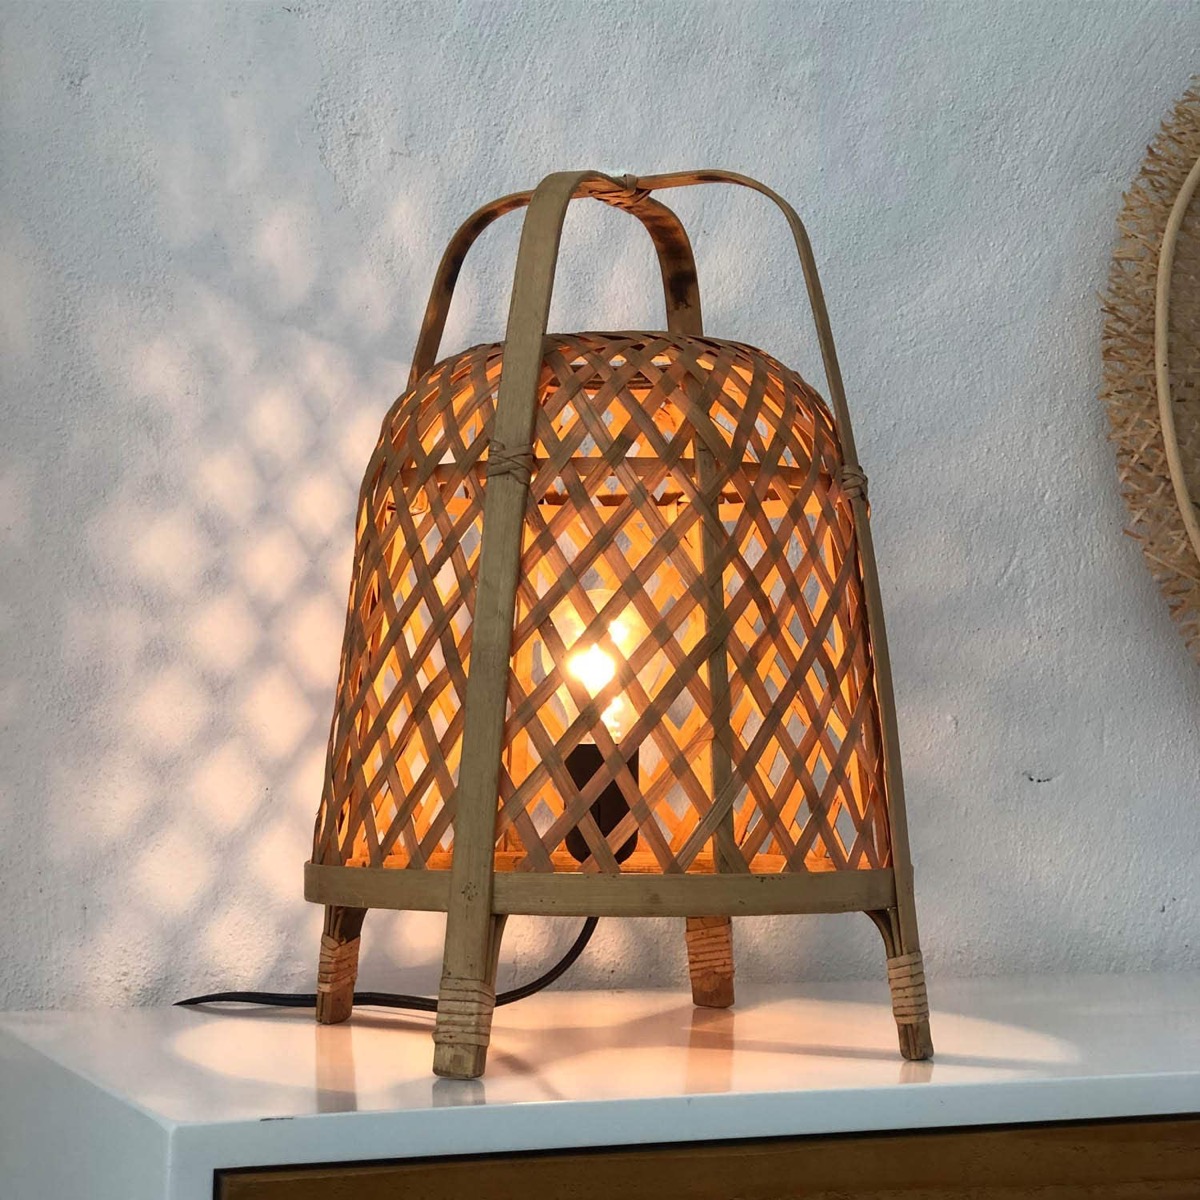 http://www.home-designing.com/product-of-the-week-a-beautiful-woven-bamboo-lamp